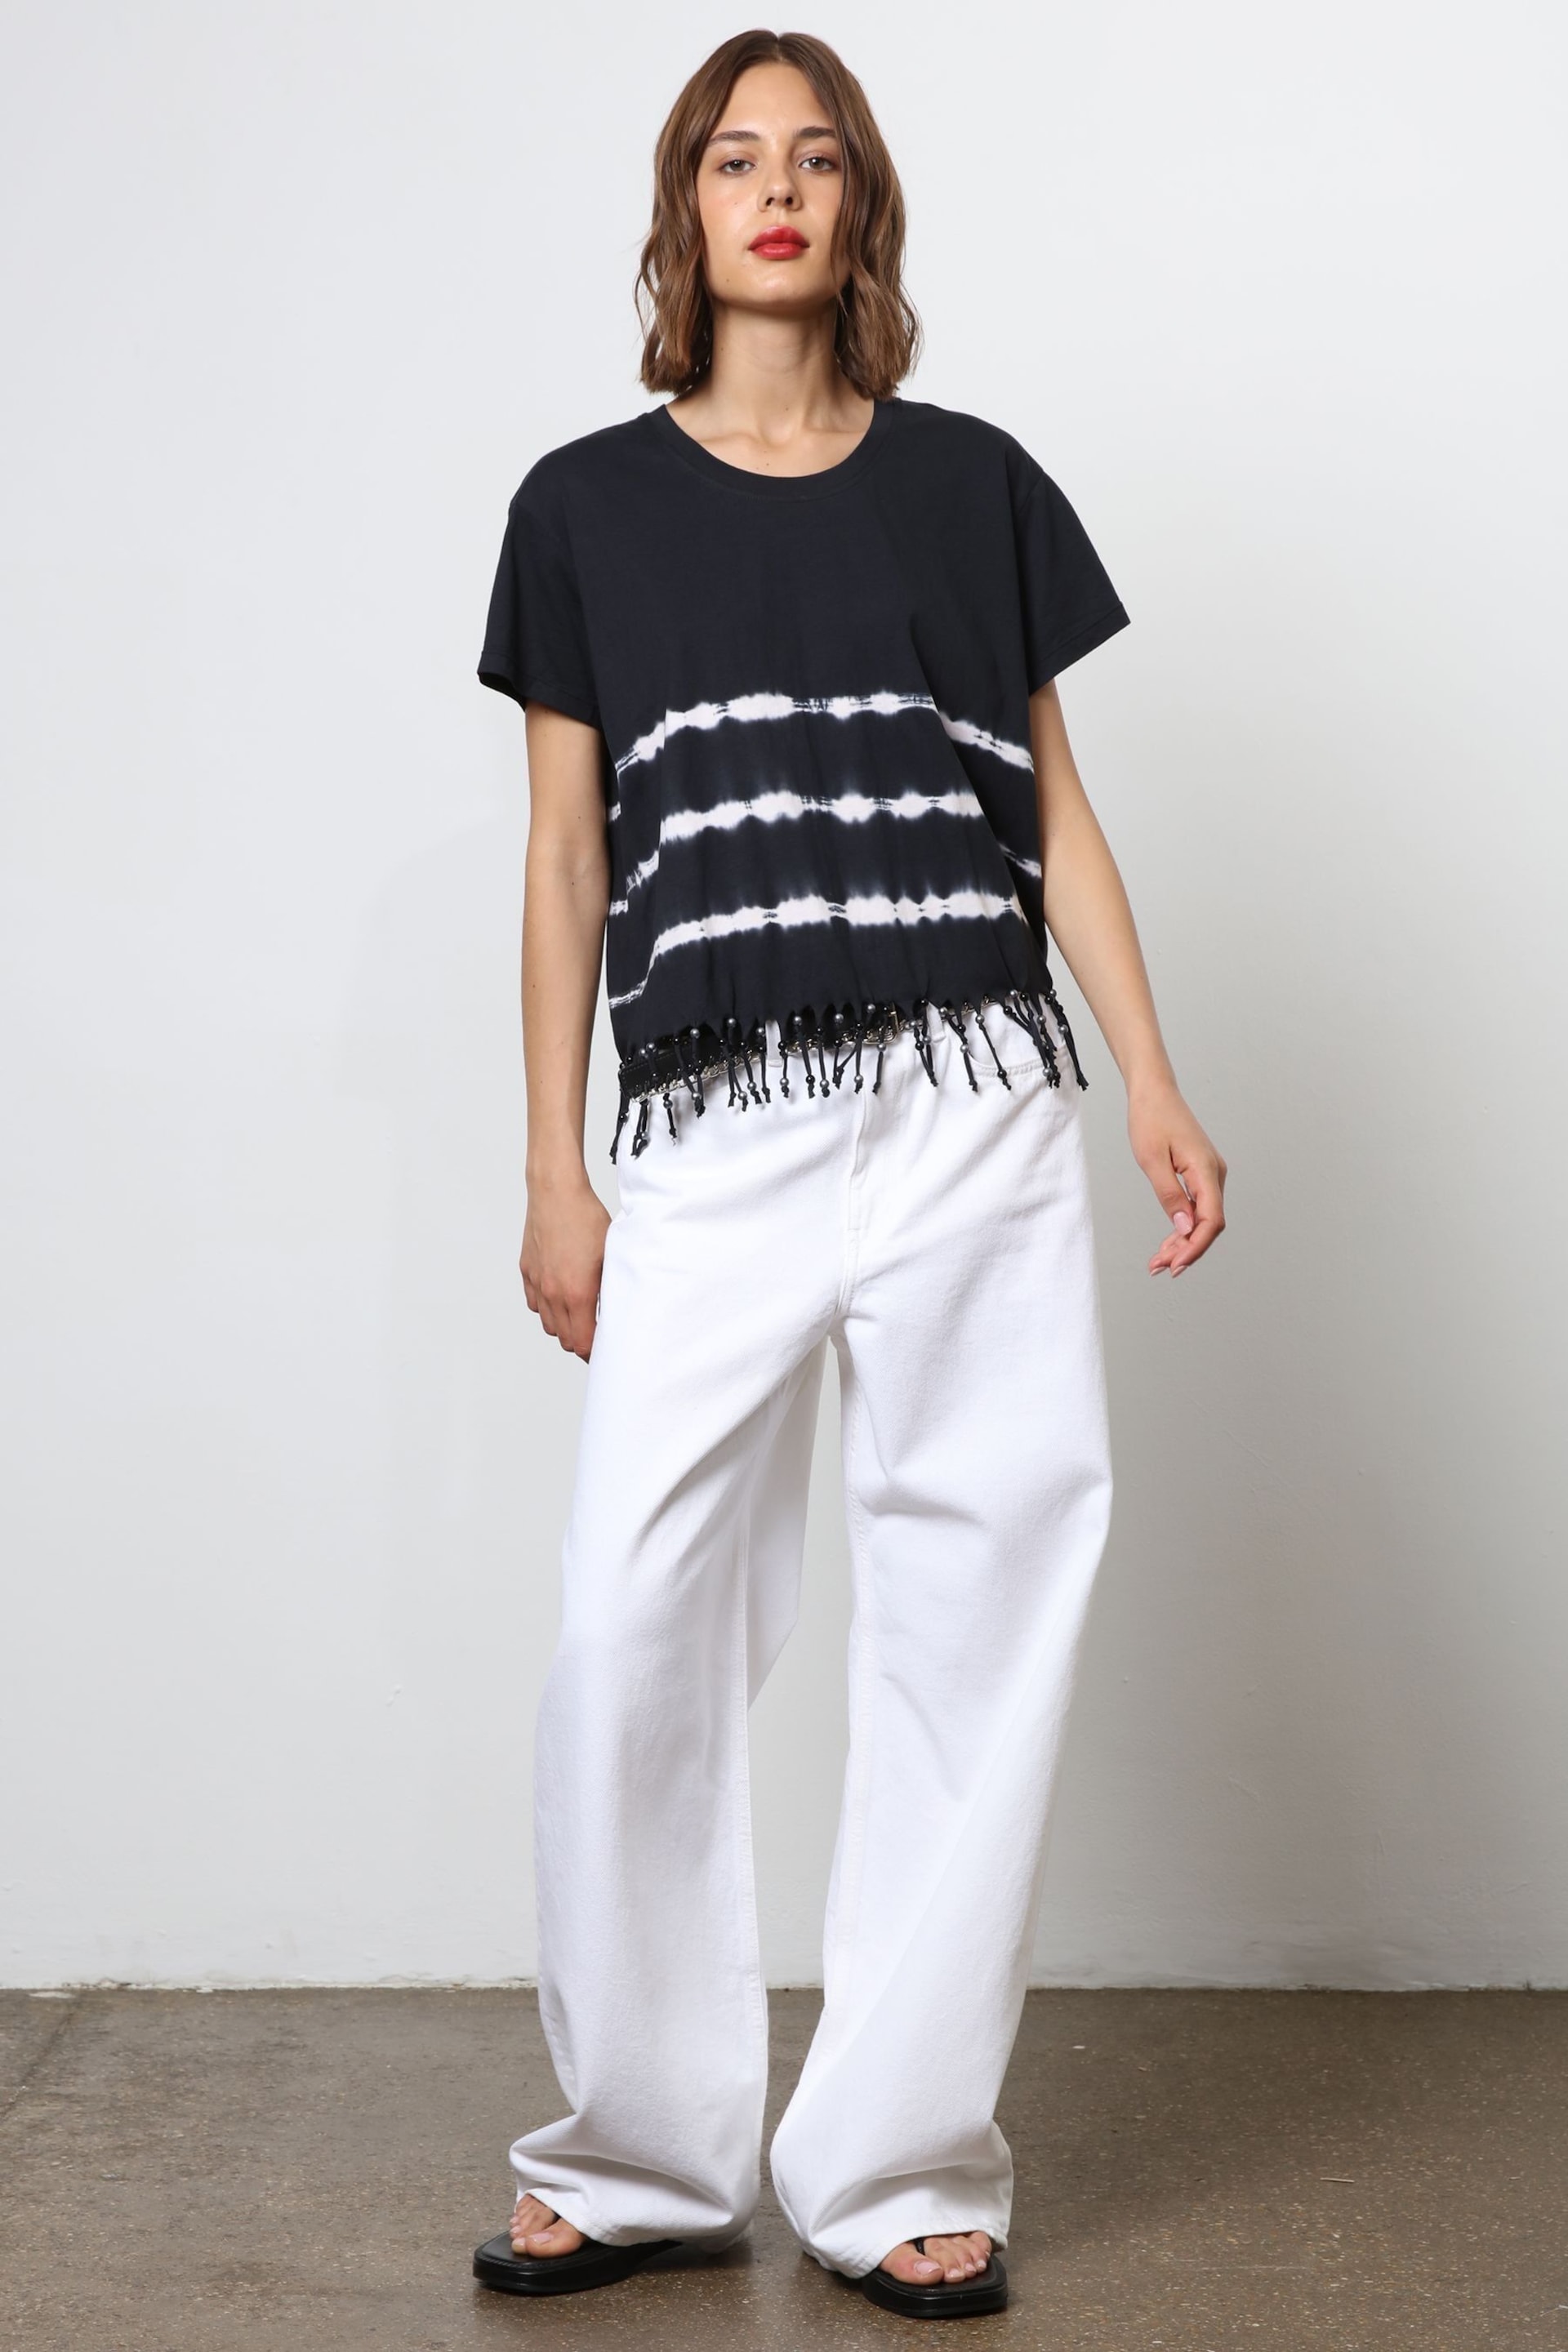 Religion Black Oversized Particle T-Shirt with Tie Dye Stripe and Tassles - Image 3 of 6